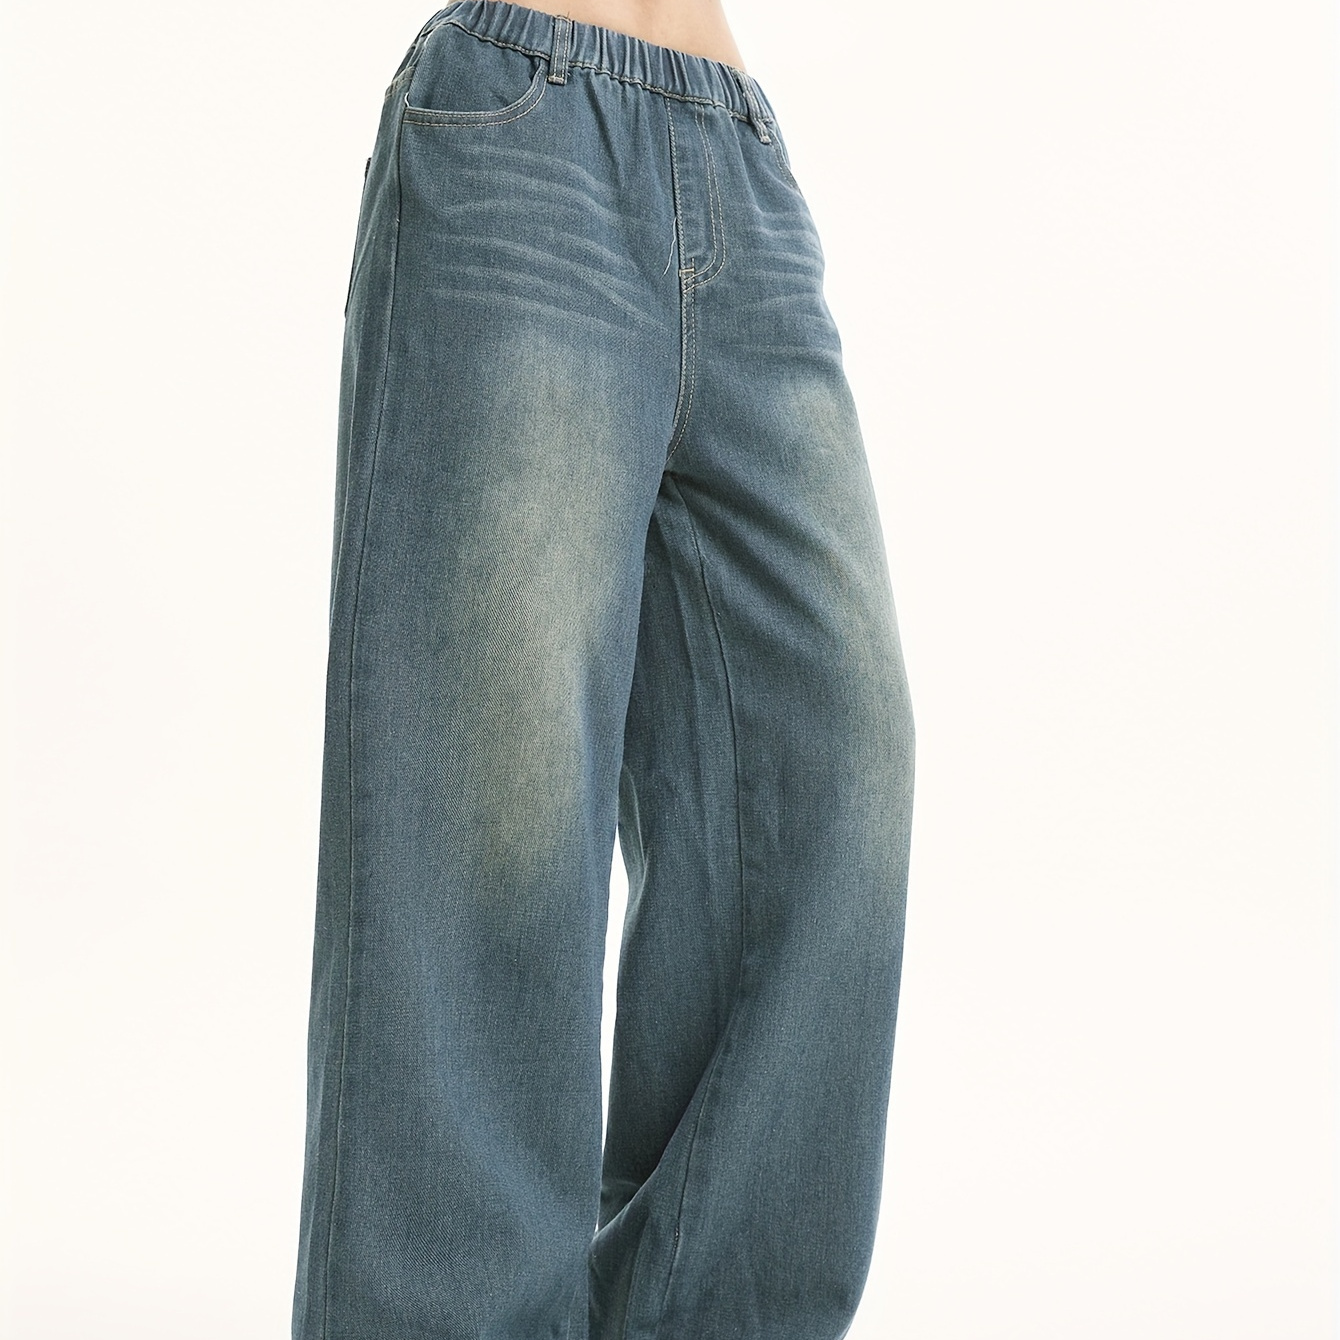 

Vintage Style Loose Wide-leg Jeans For Teenage Girls - Make Her Looks More Stylish!